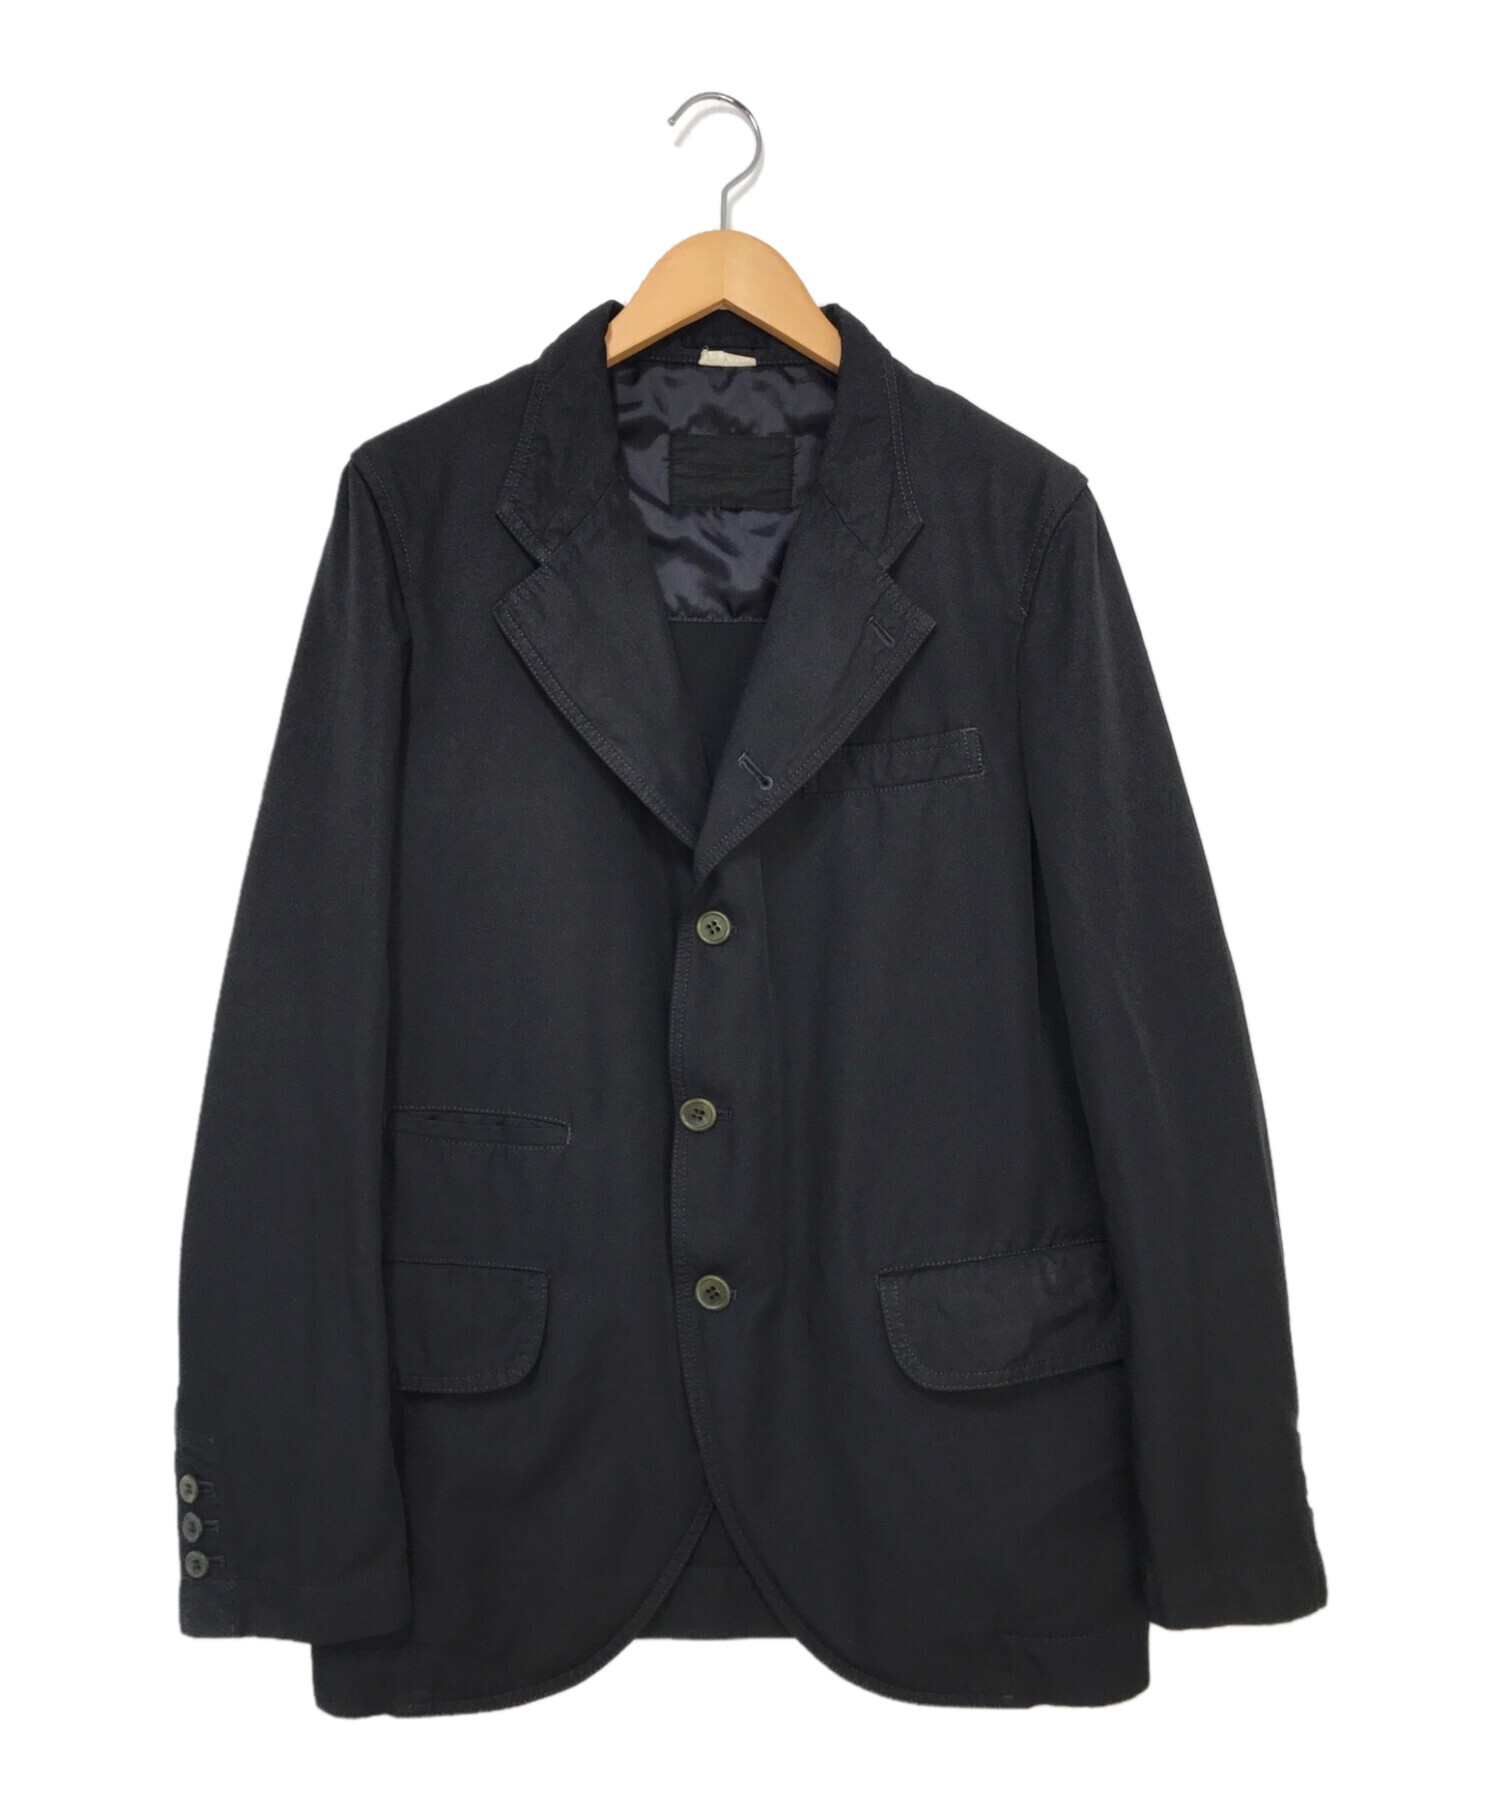 SALE HOMME PLUS EVER GREEN 縮絨 ジャケット veme.fi